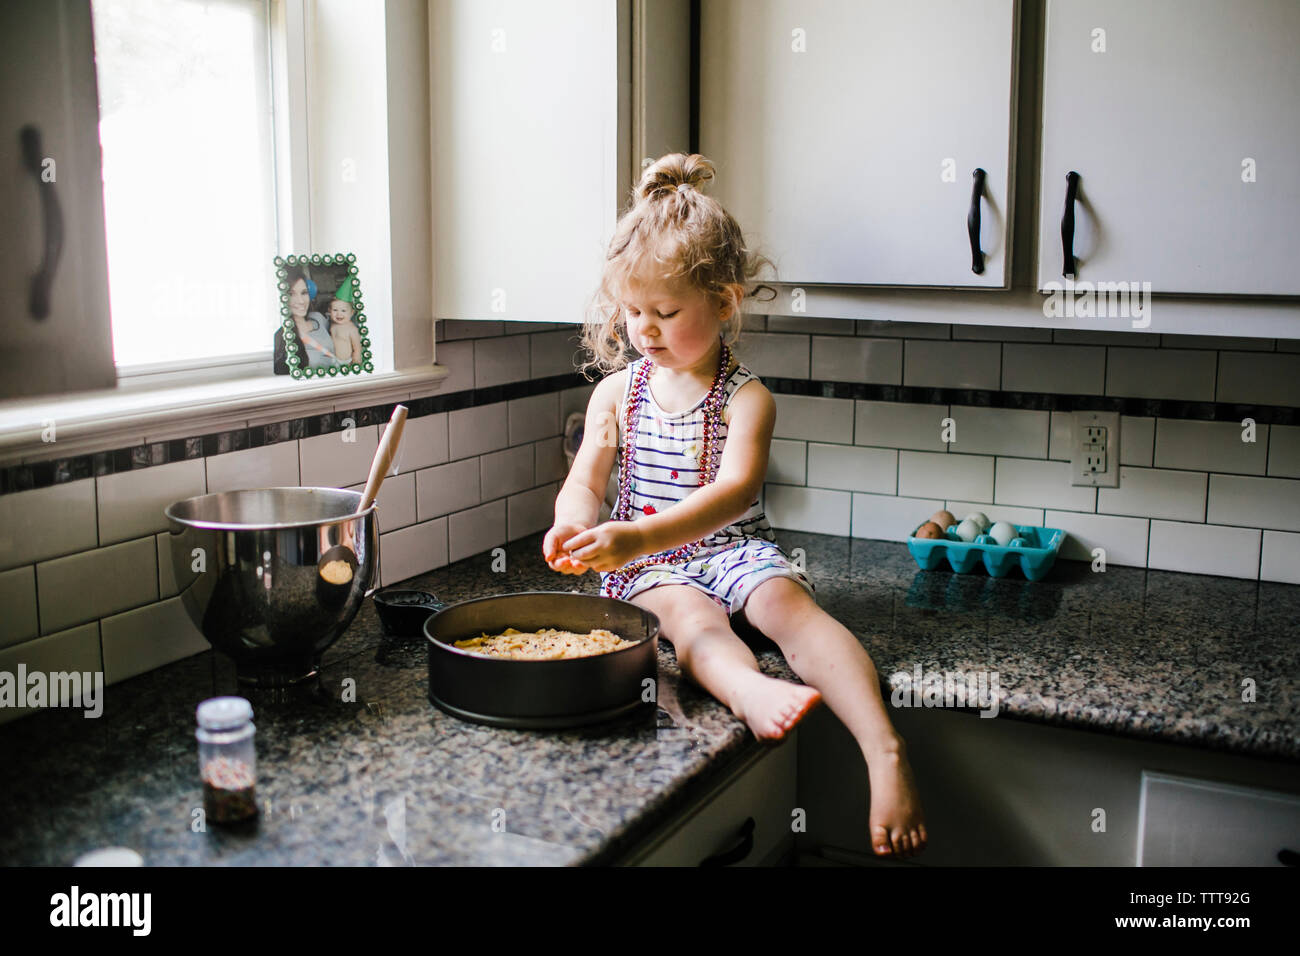 Girl preparing food in container while sitting on kitchen counter Stock Photo